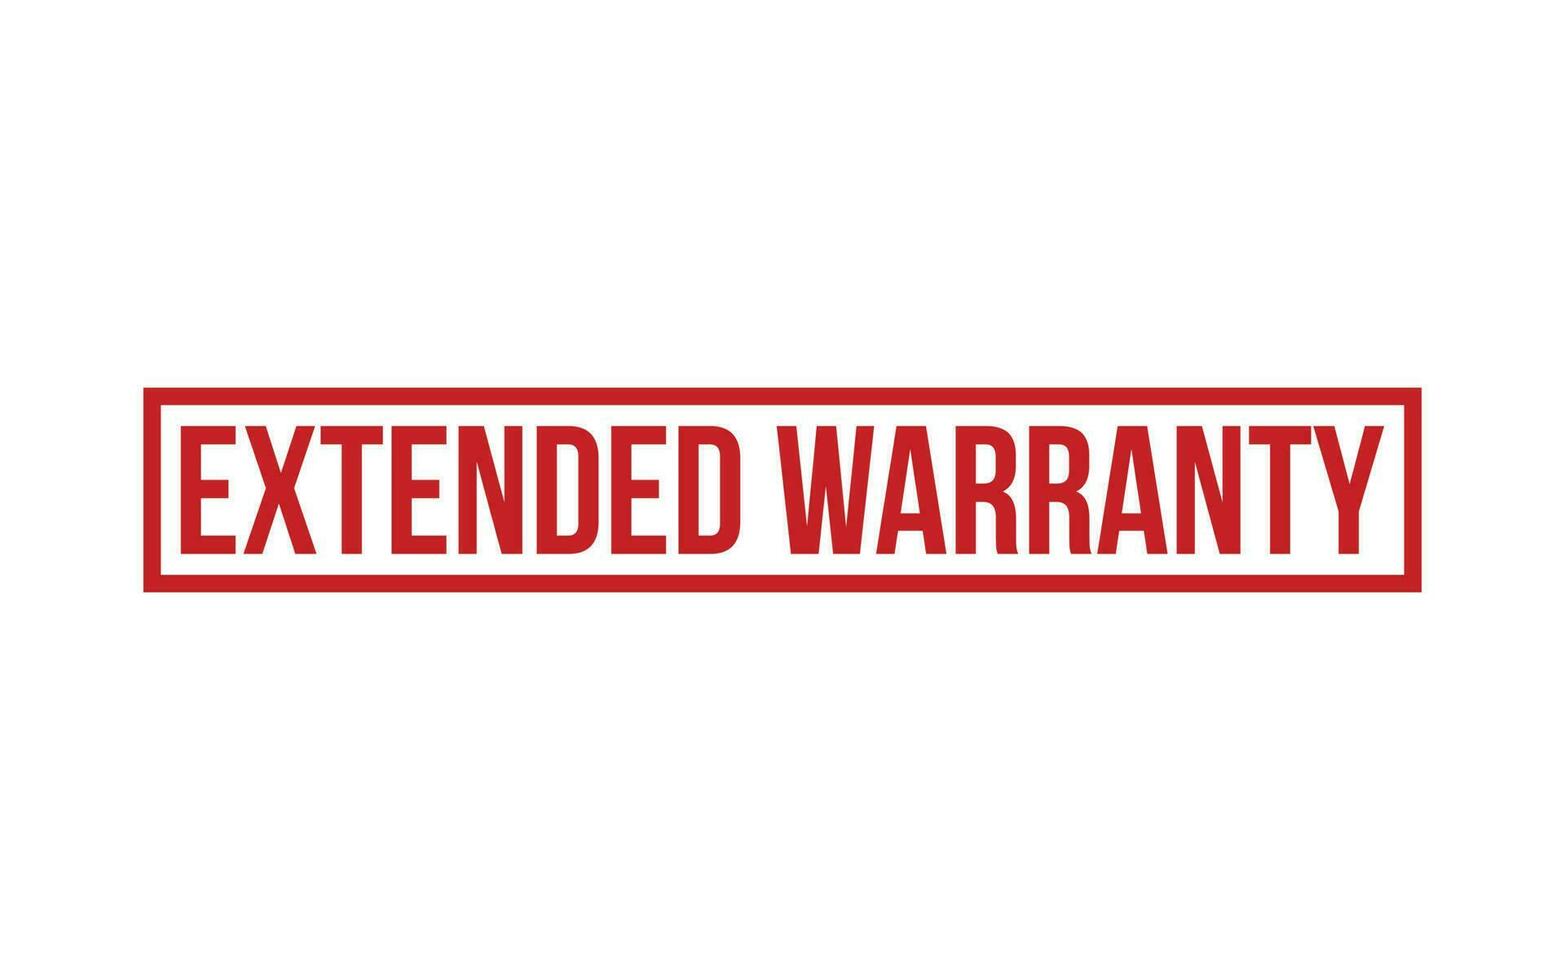 Extended Warranty Rubber Stamp Seal Vector